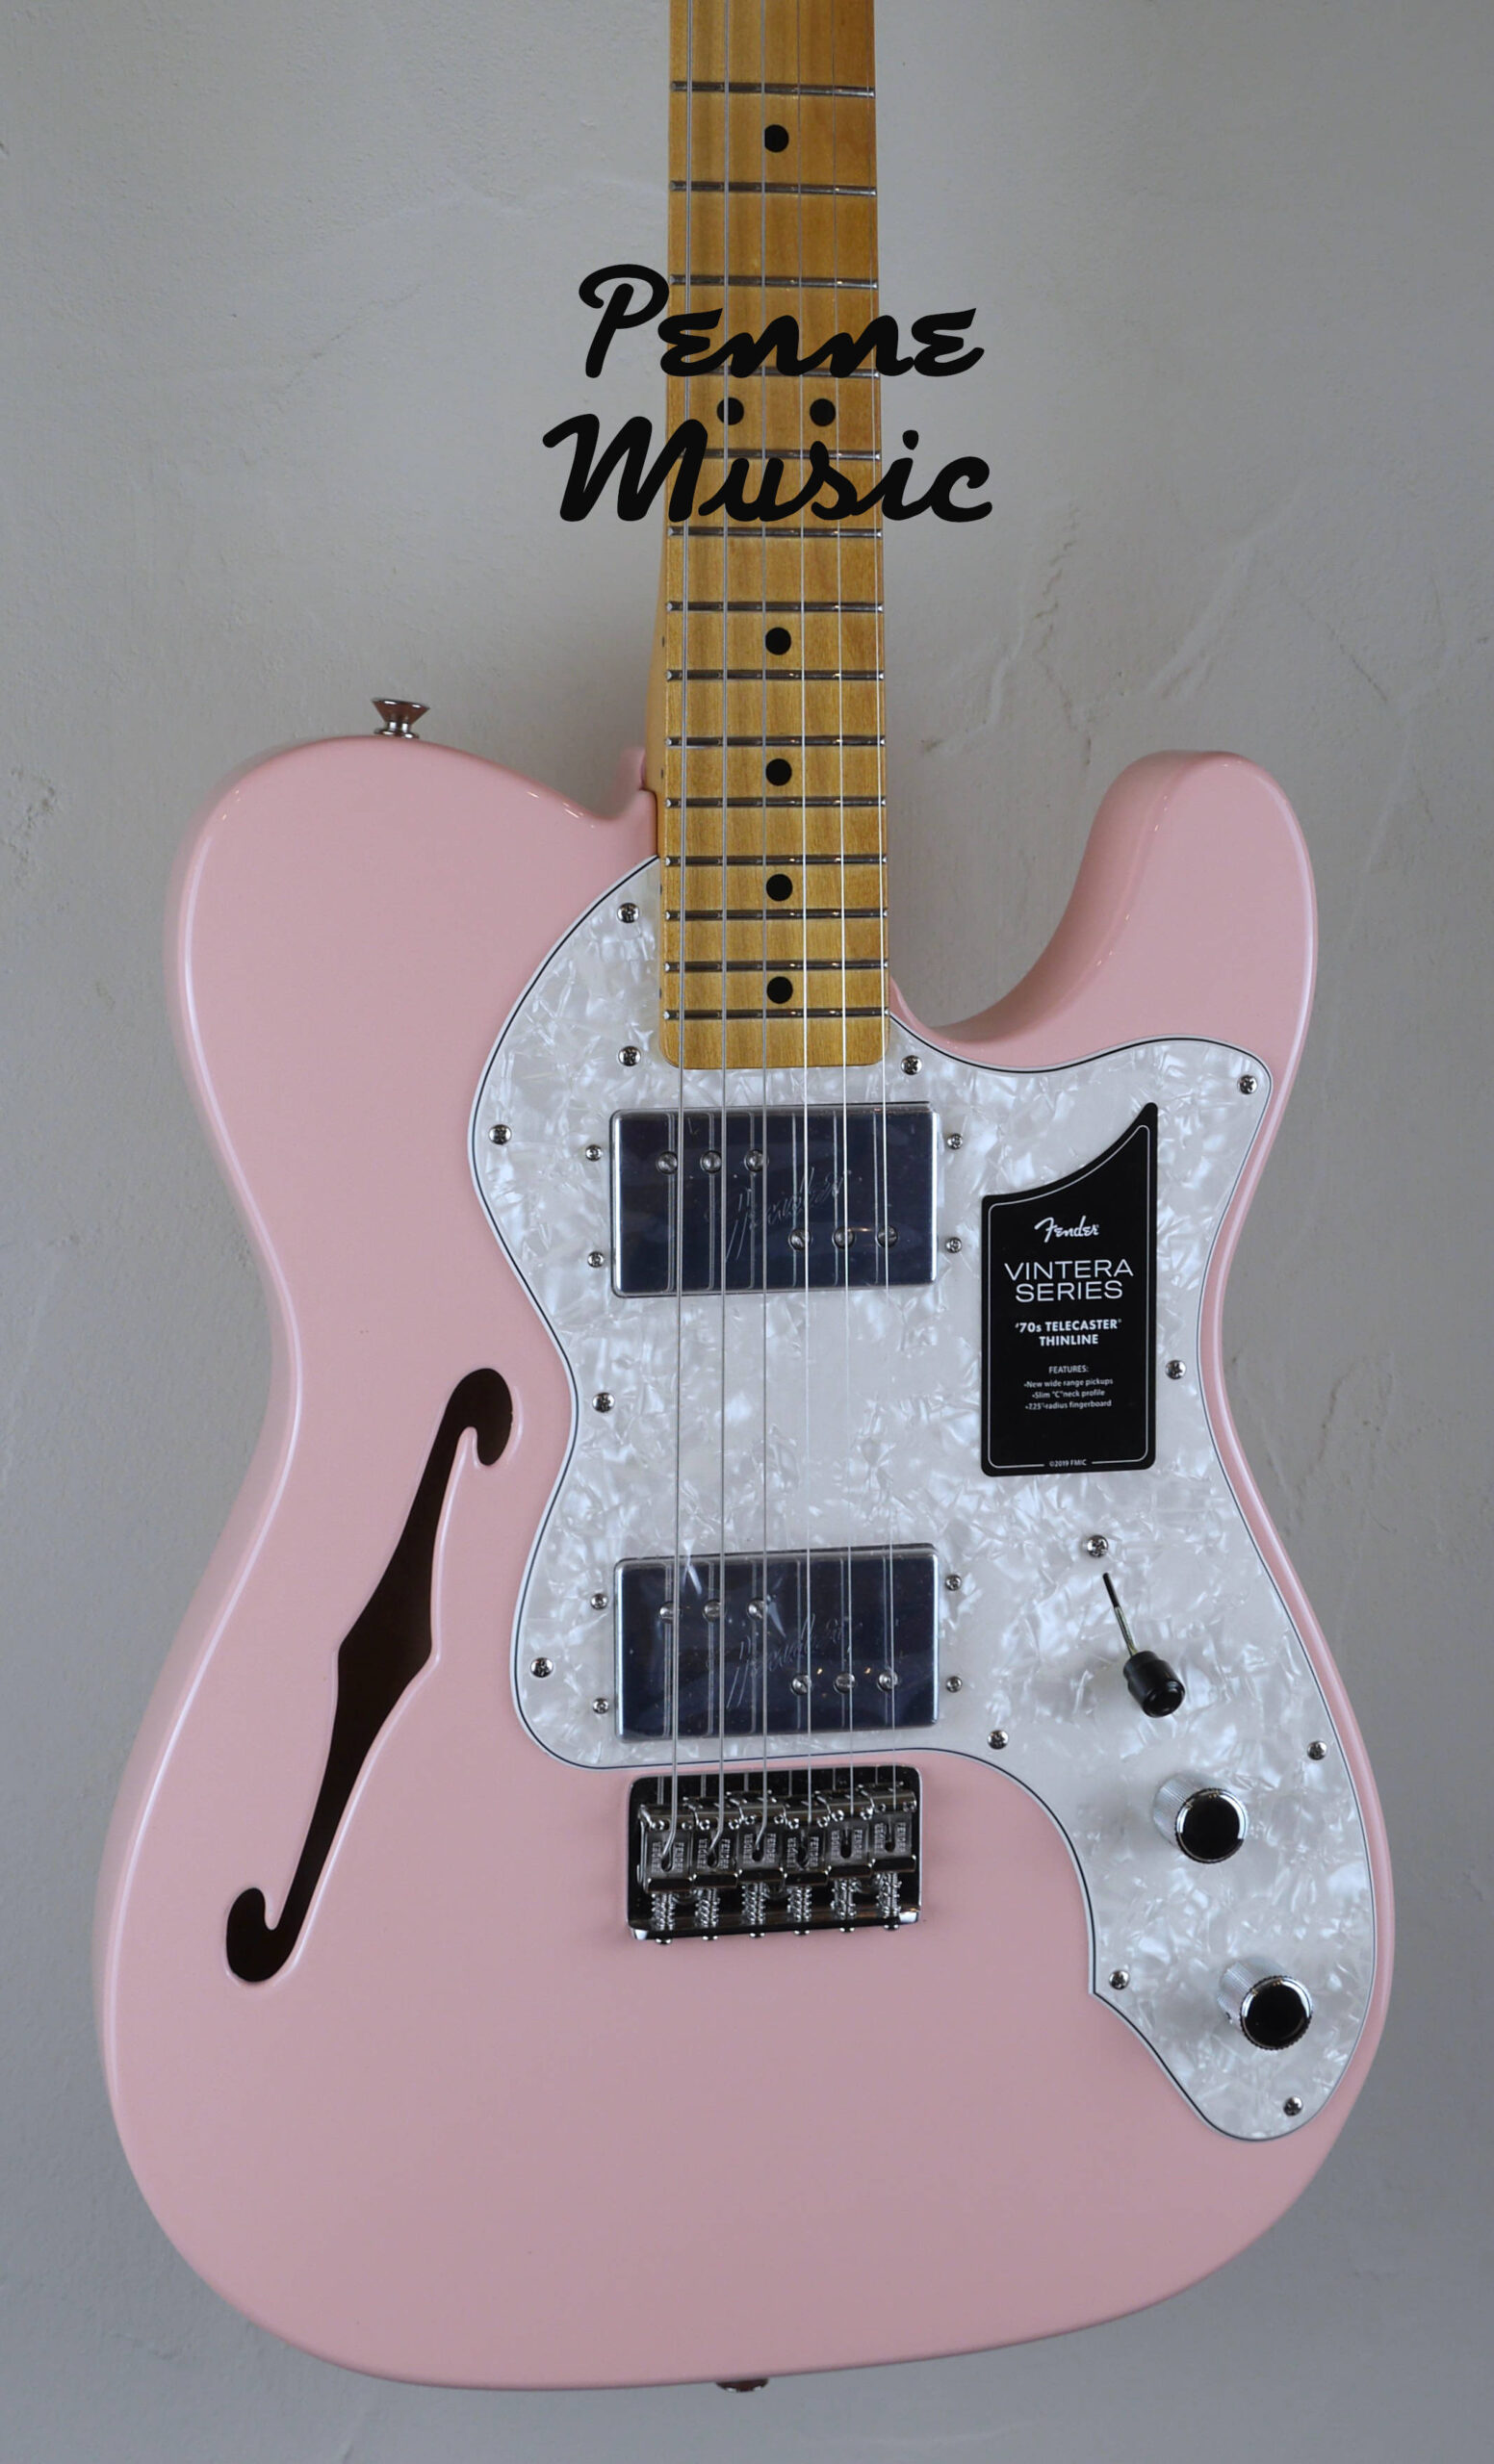 Fender Limited Edition Vintera 70 Telecaster Thinline Shell Pink 3